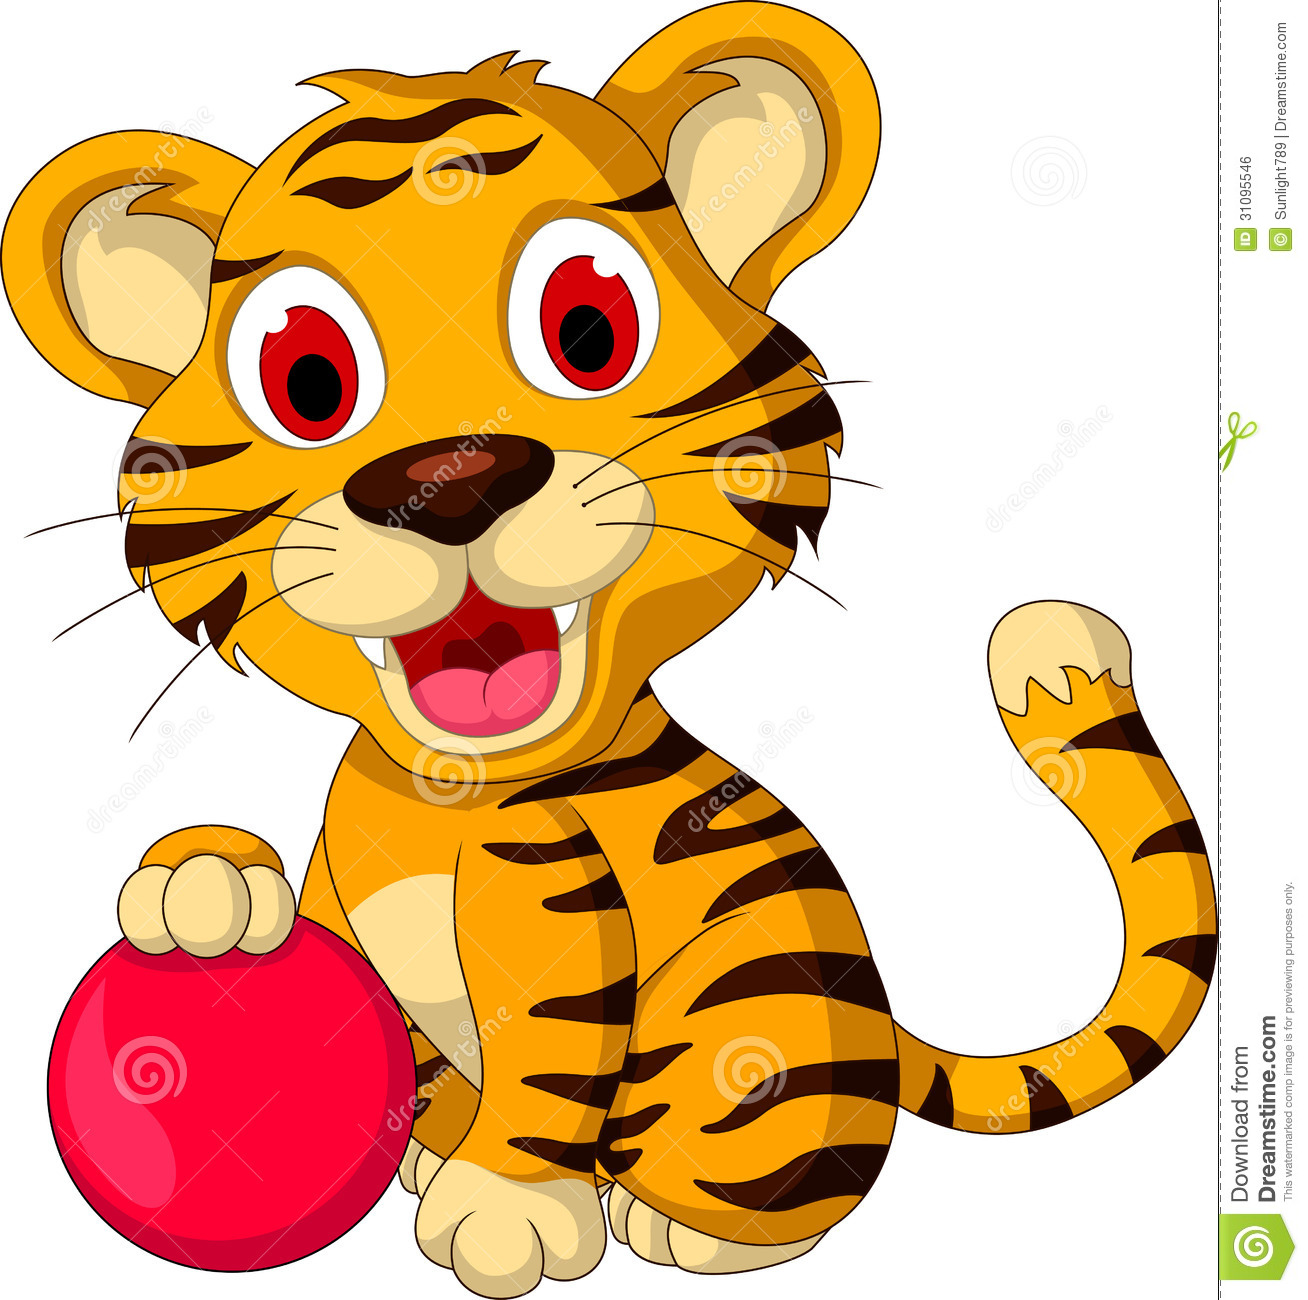 clipart tiger thinking